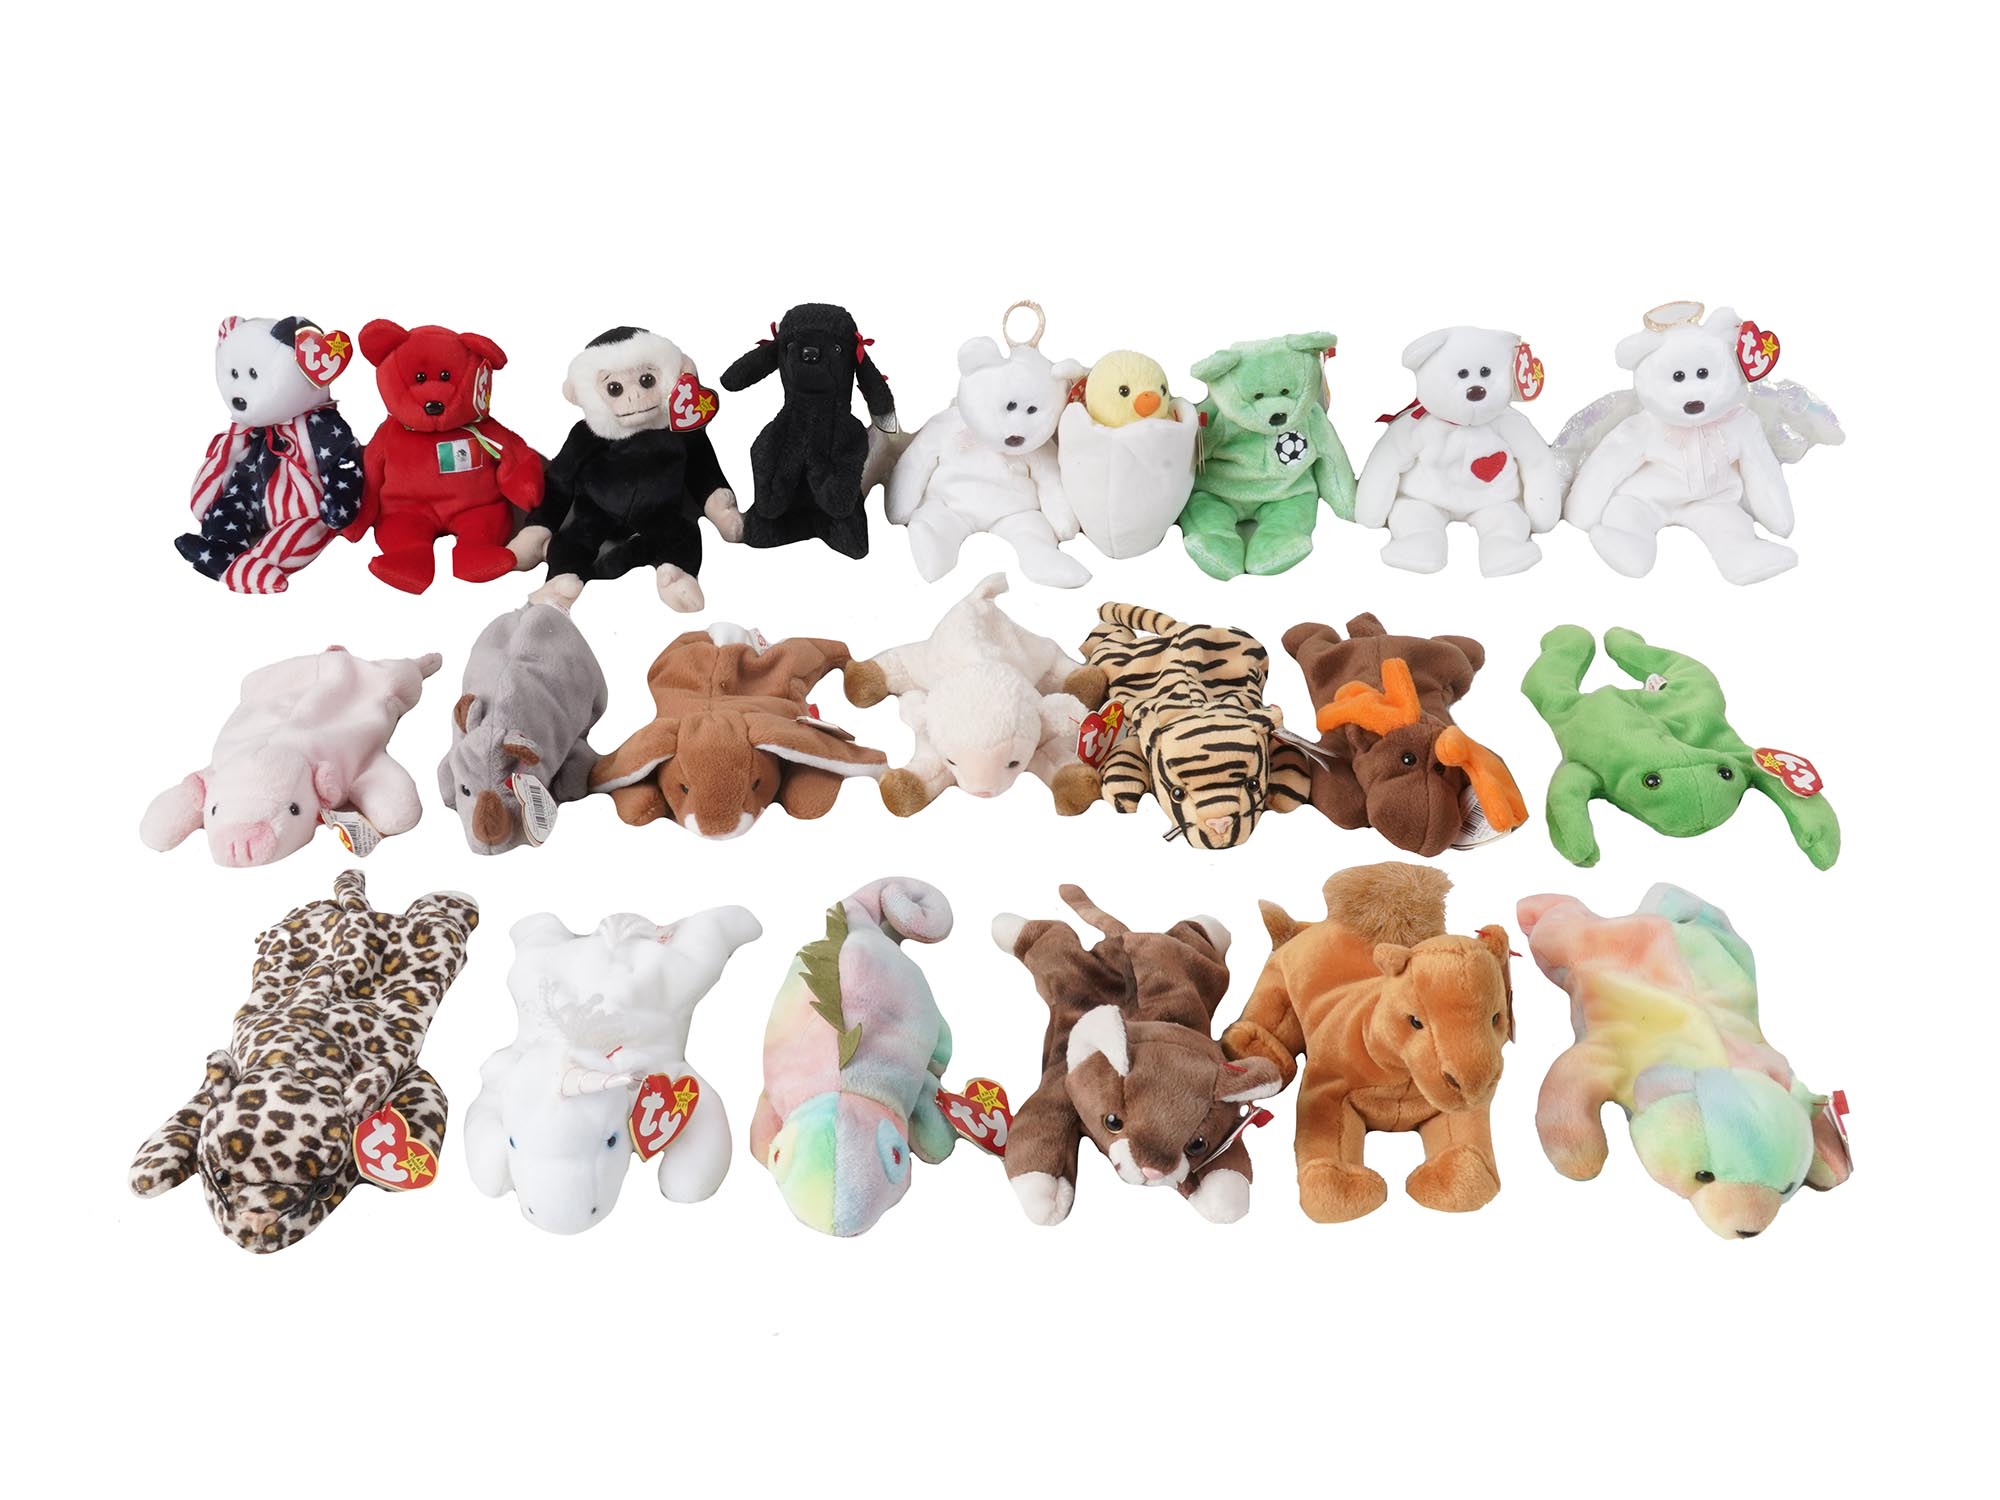 VINTAGE 1990S BEANIE BABY ANIMAL TOYS COLLECTION PIC-1